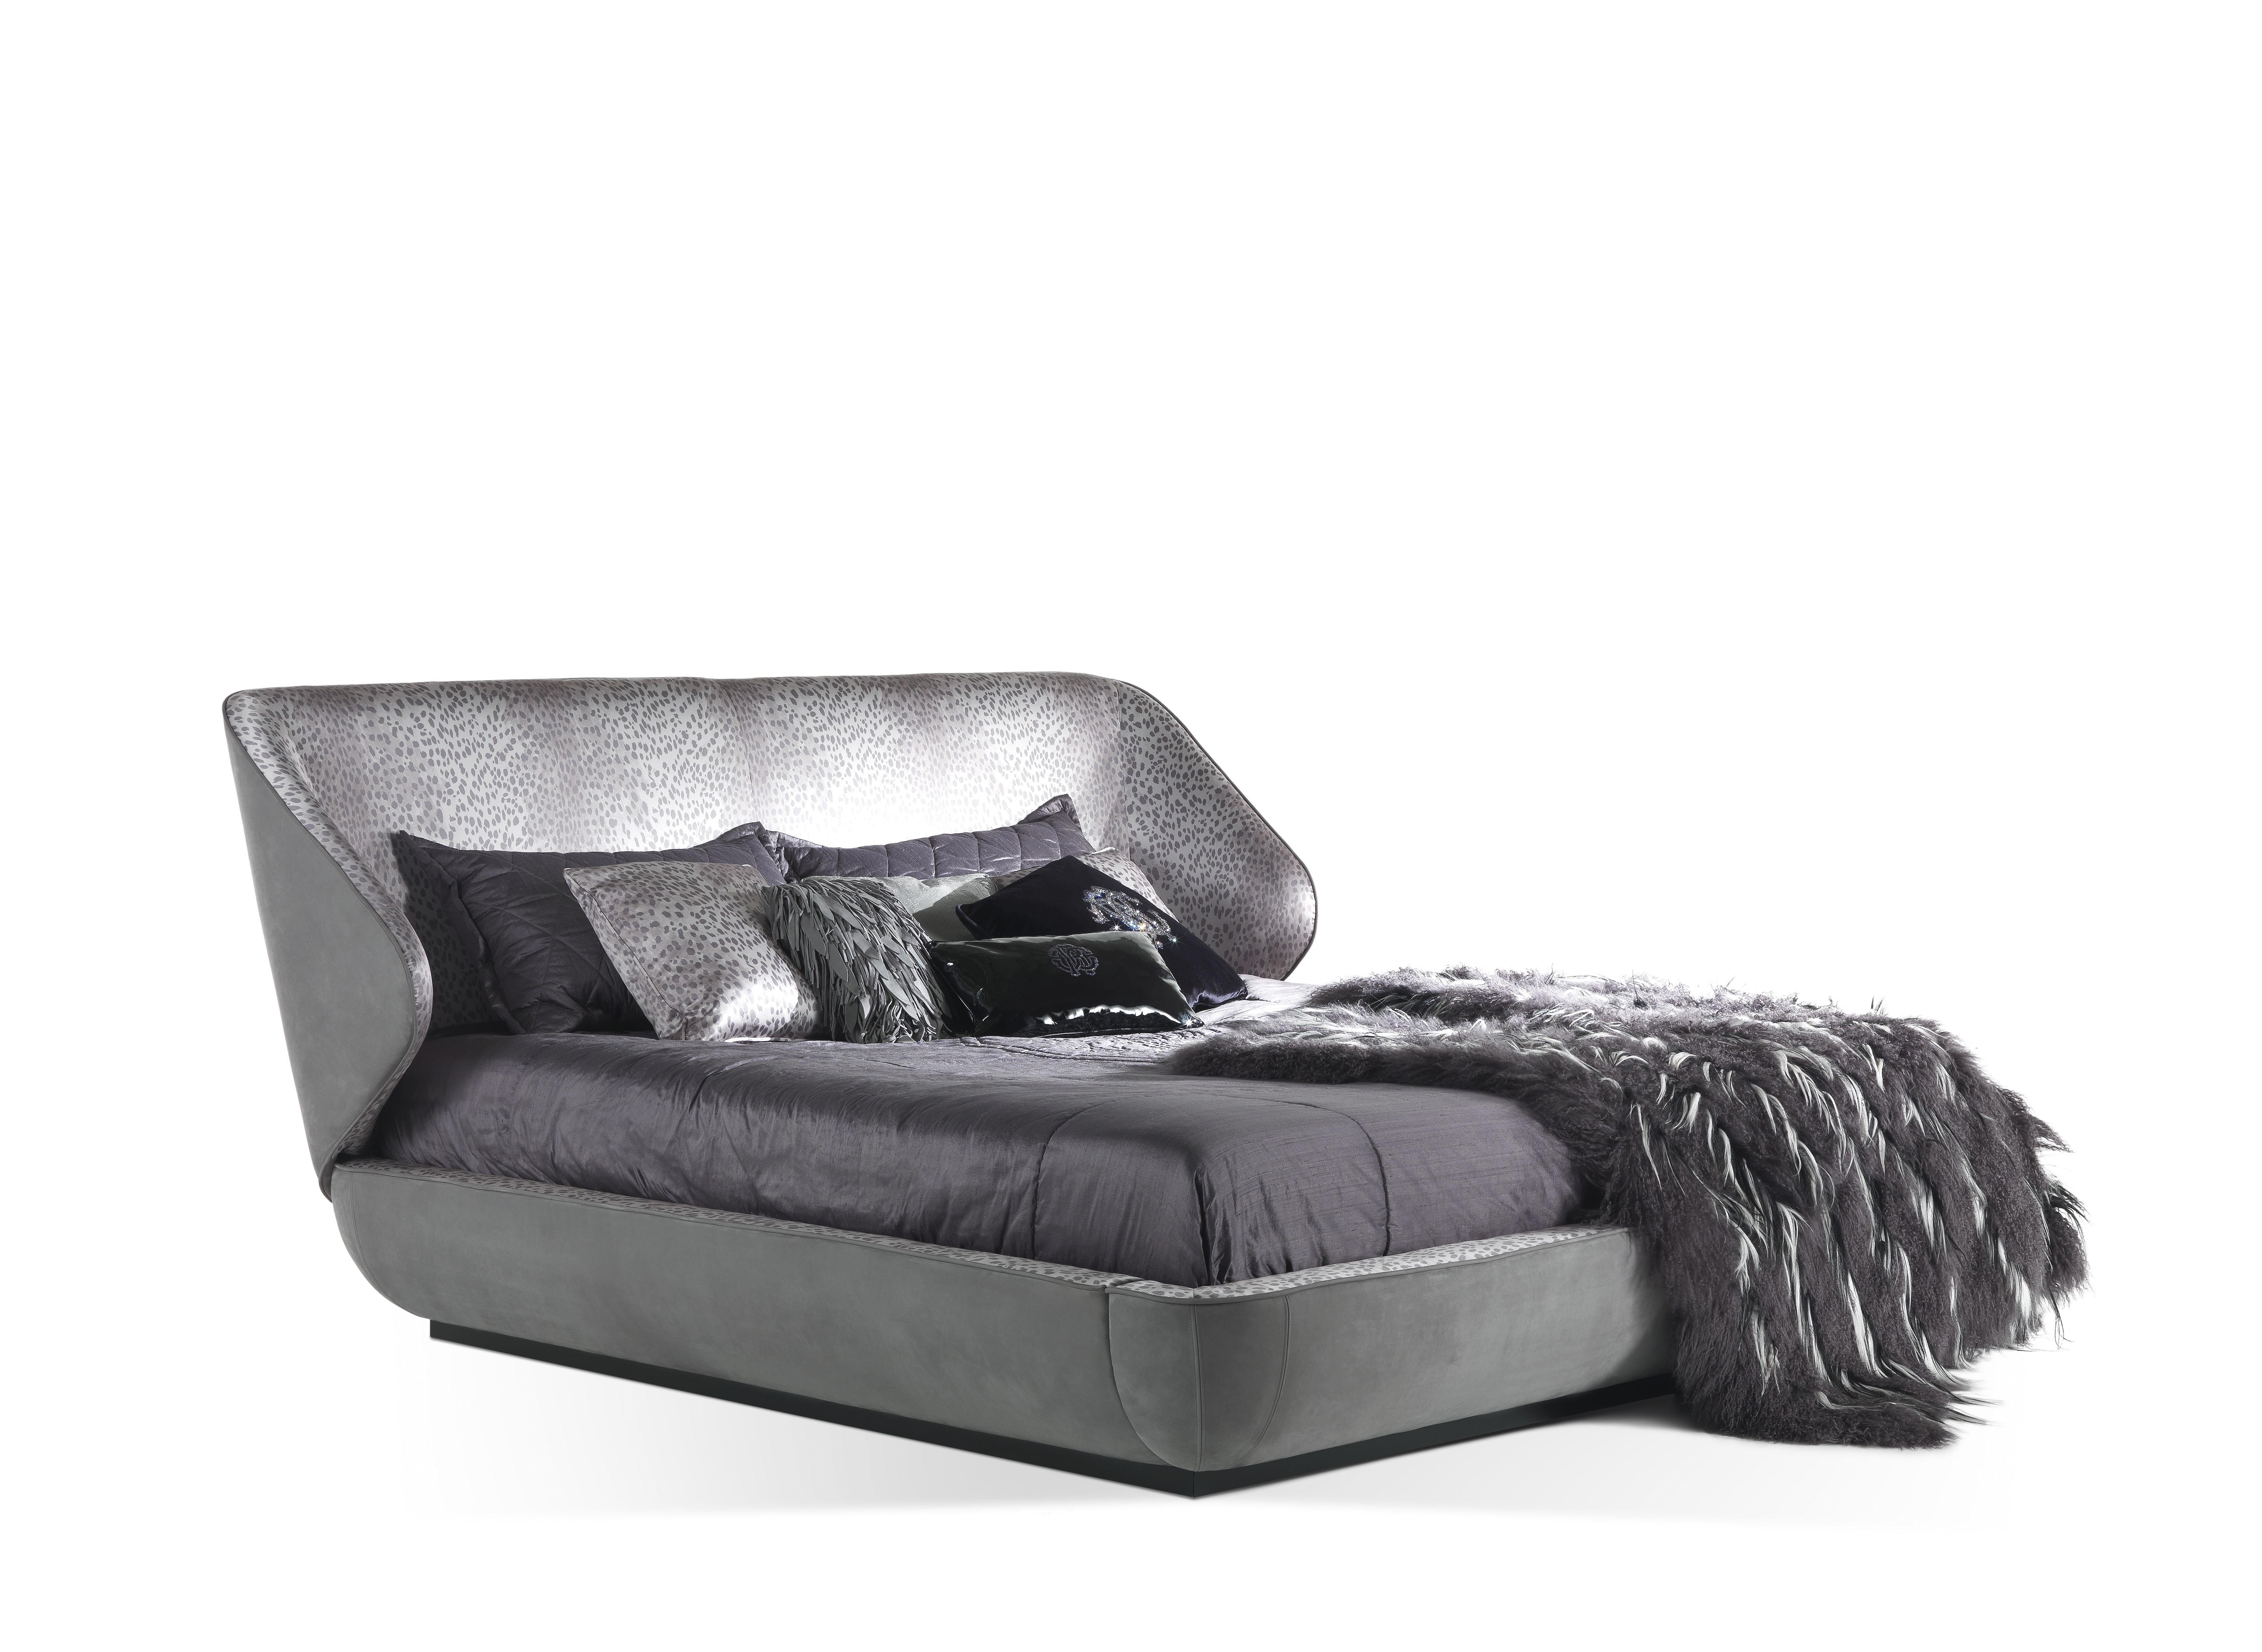 A Bed with an attractive design, characterized by sinuous and rounded shapes, enhanced by the enveloping backrest. Sensuality, hospitality and charm in a single piece of furniture: the perfect ingredients for creating a seductive relaxing setting in